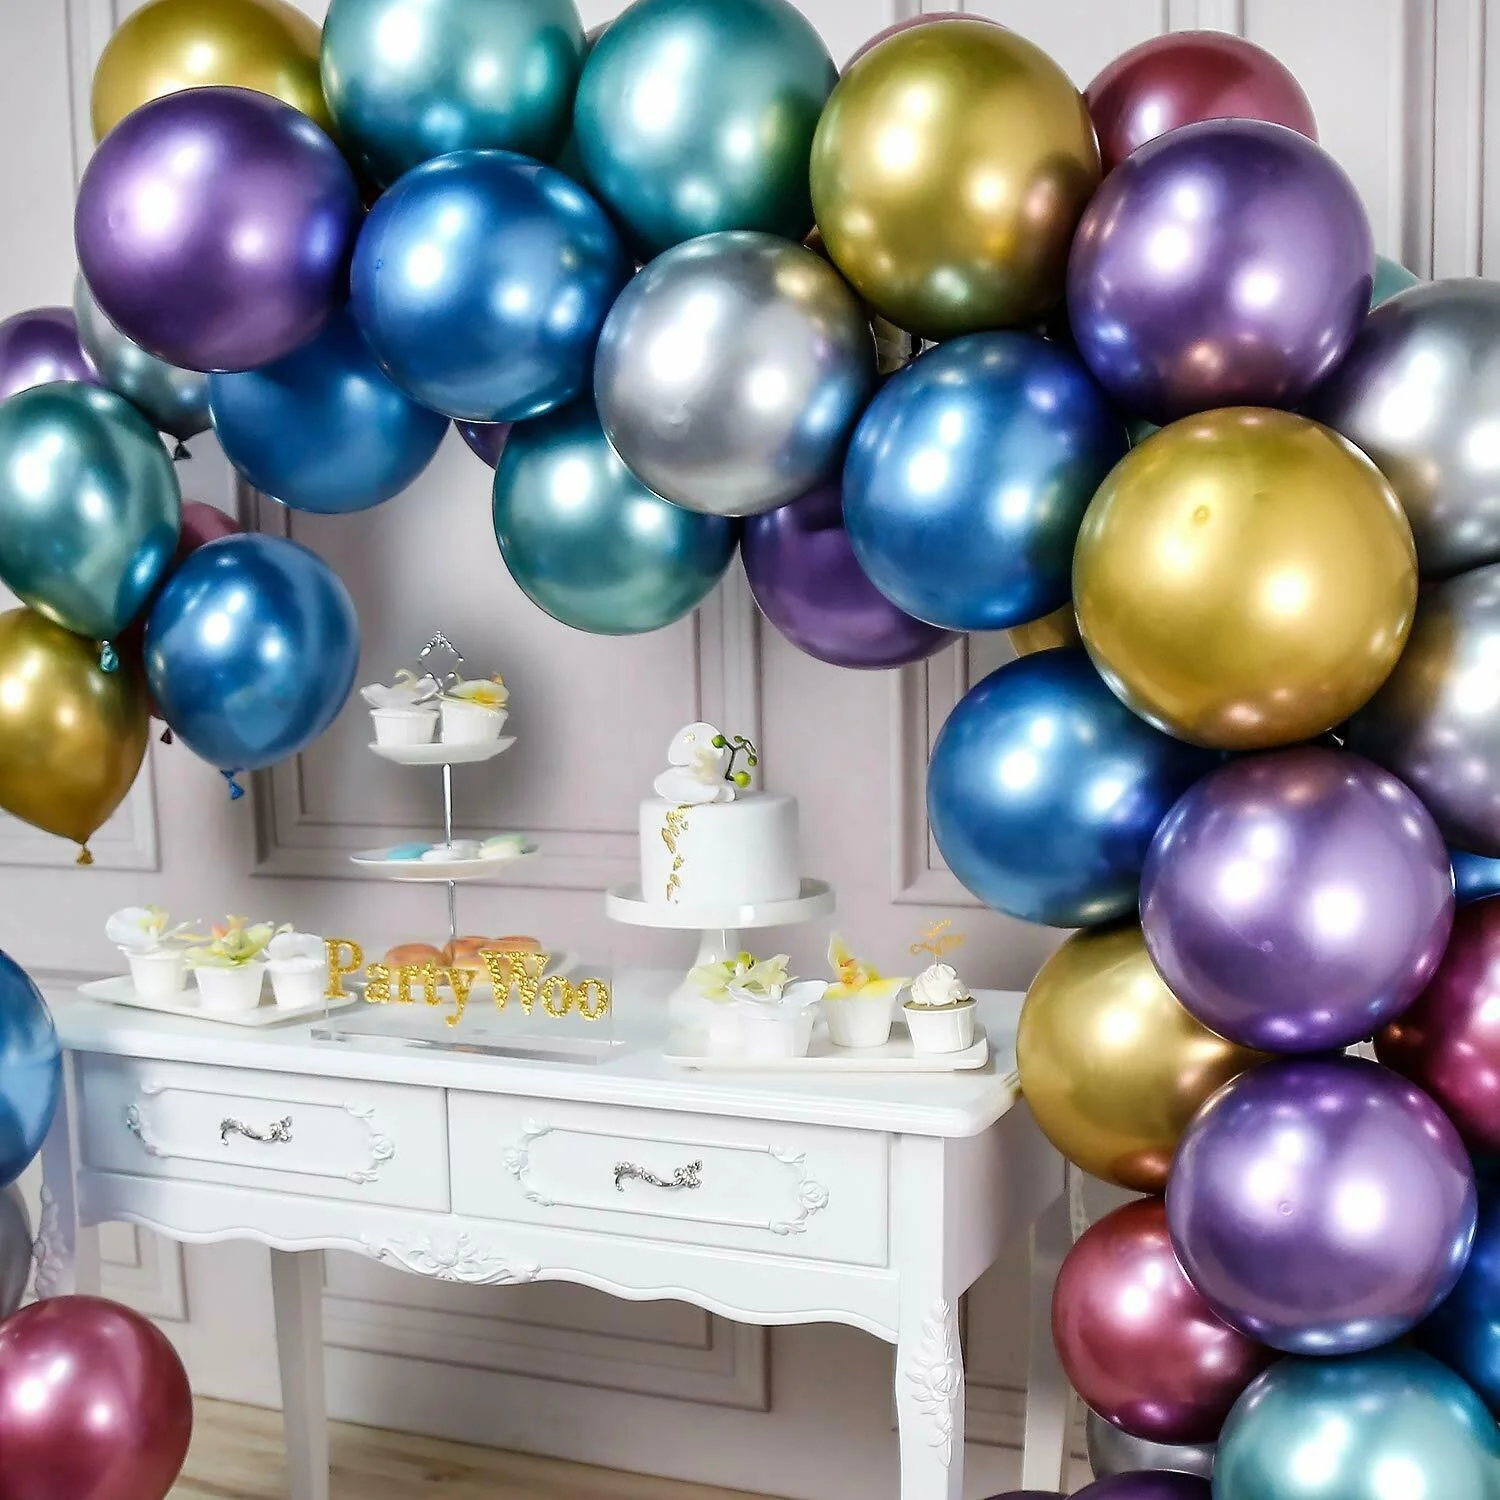 

Shuaian 5 inch 100 pcs chrome balloons party decorations baby shower decoration birthday metallic latex balloons